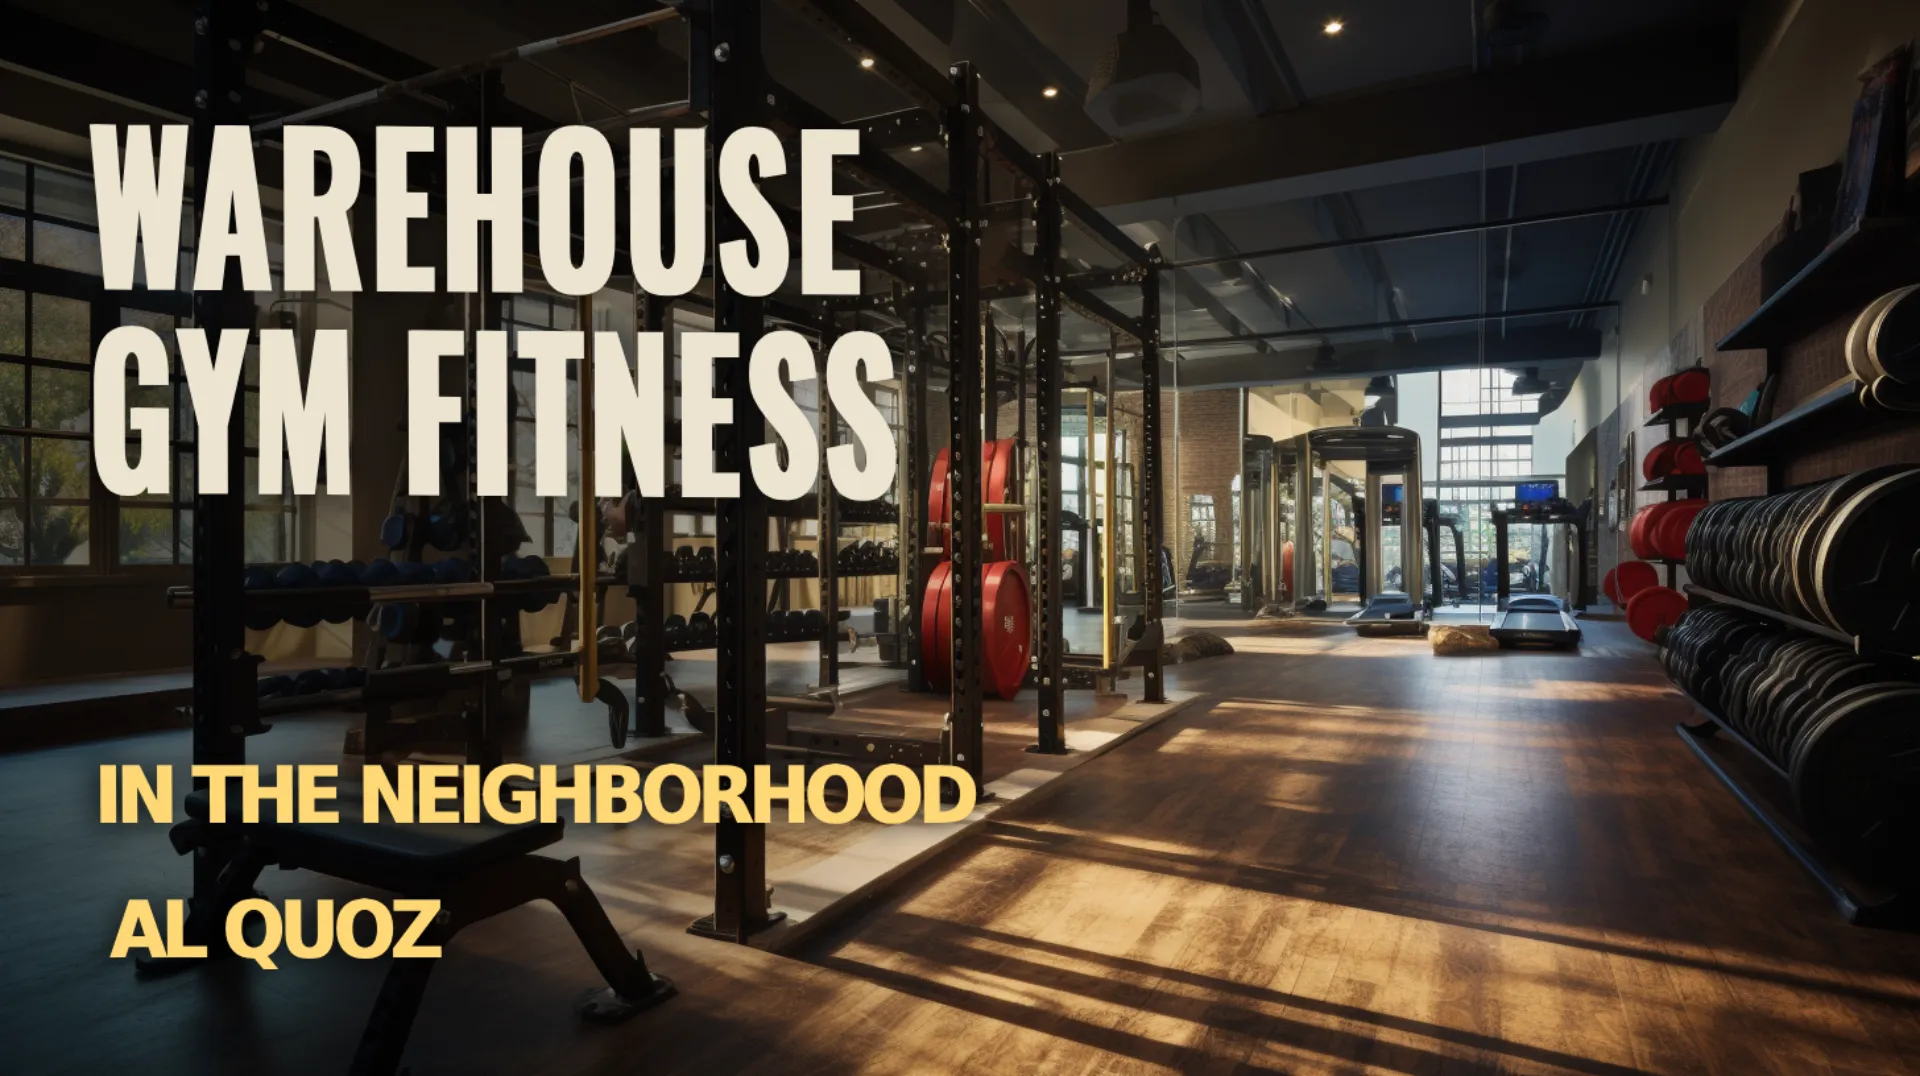 Empower your sport at Warehouse Gym fitness in Al Quoz